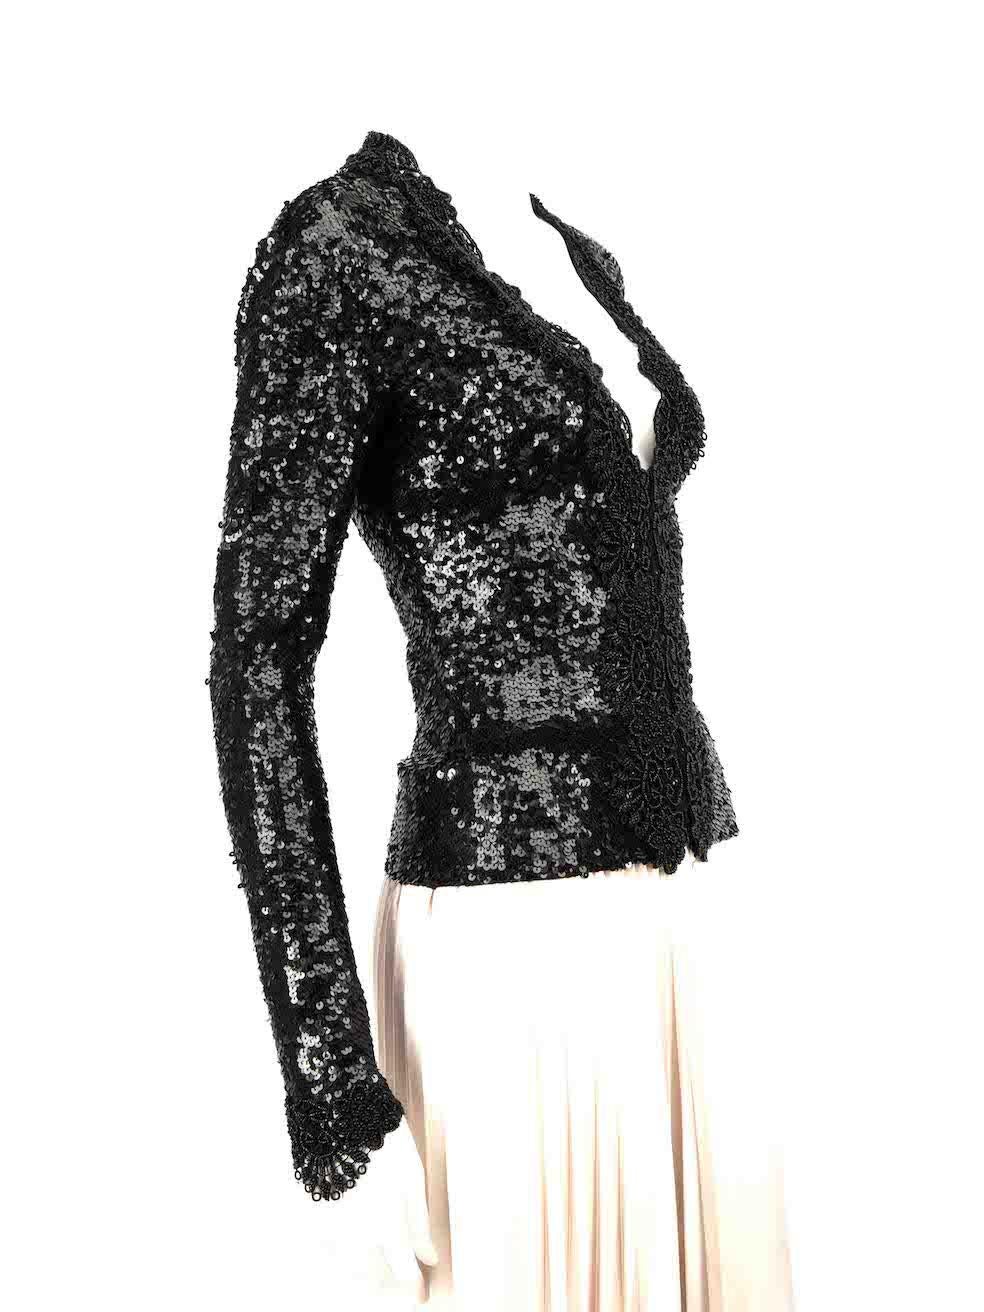 CONDITION is Very good. Minimal wear to cardigan is evident. Minimal wear to the left side (as worn) sleeve hem, where the beaded lace embellishment has partially detached on this used PAROSH designer resale item.
 
 
 
 Details
 
 
 Black
 
